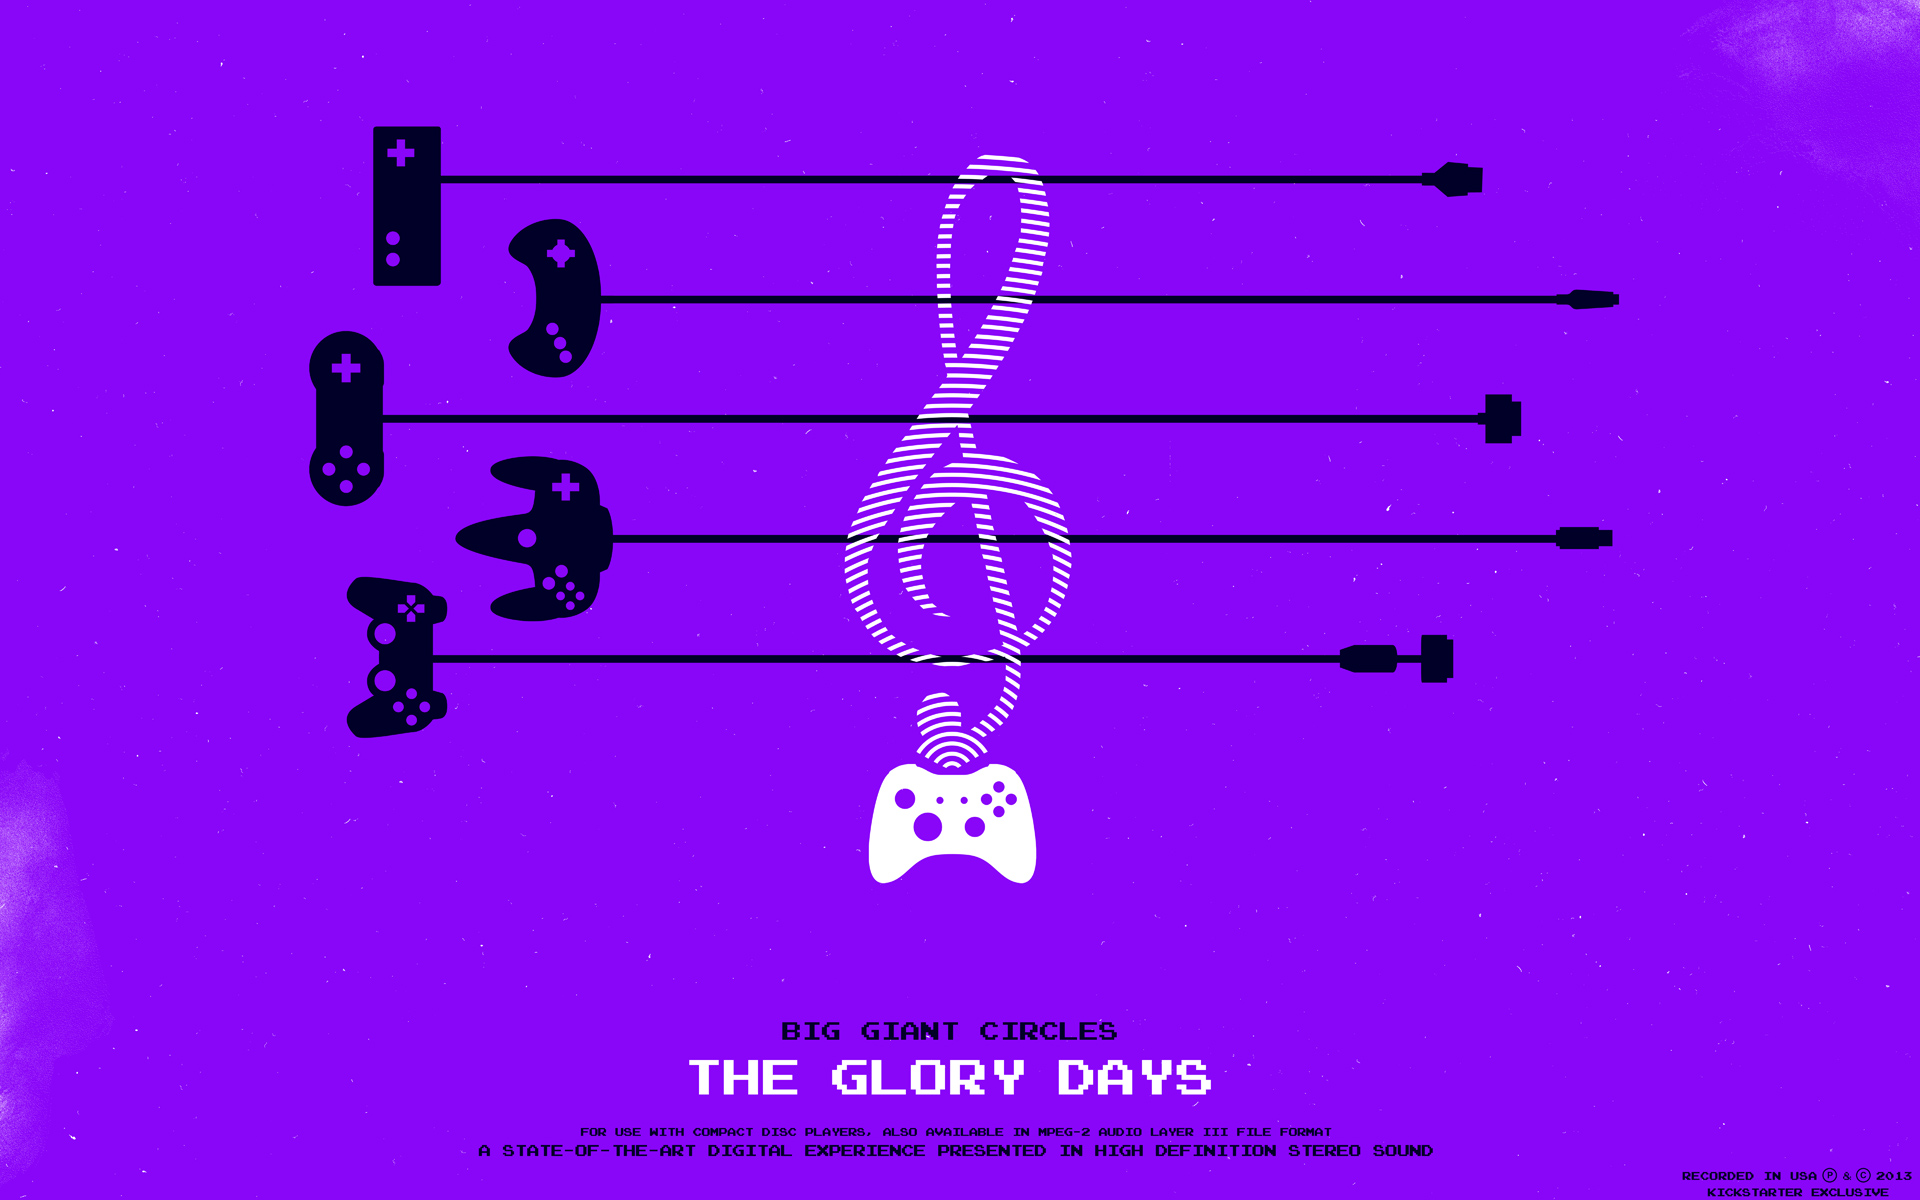 General 1920x1200 Big Giant Circles The Glory Days music purple background controllers watermarked DJ digital art simple background